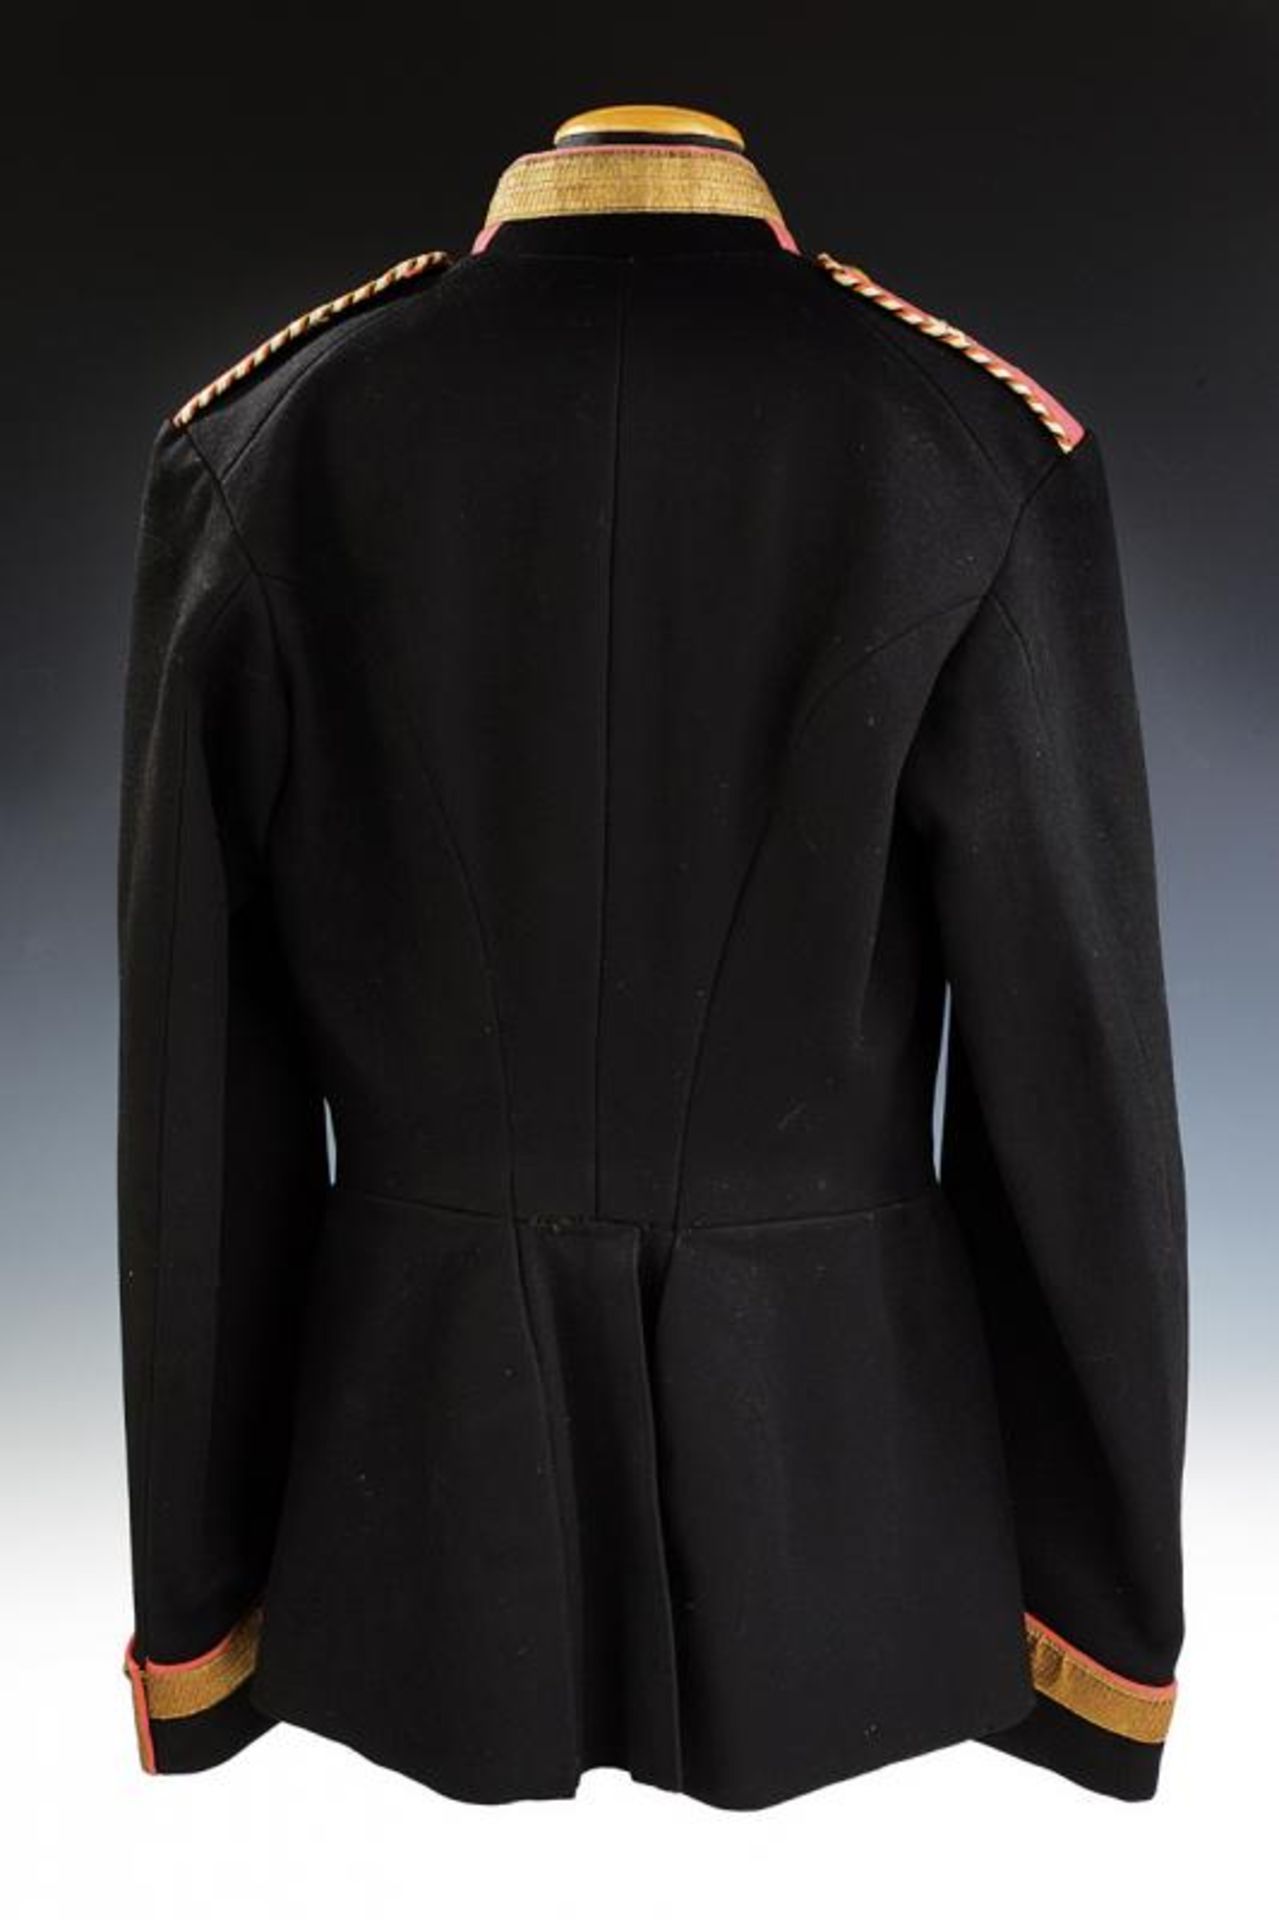 A NC-officer's uniform - Image 5 of 5